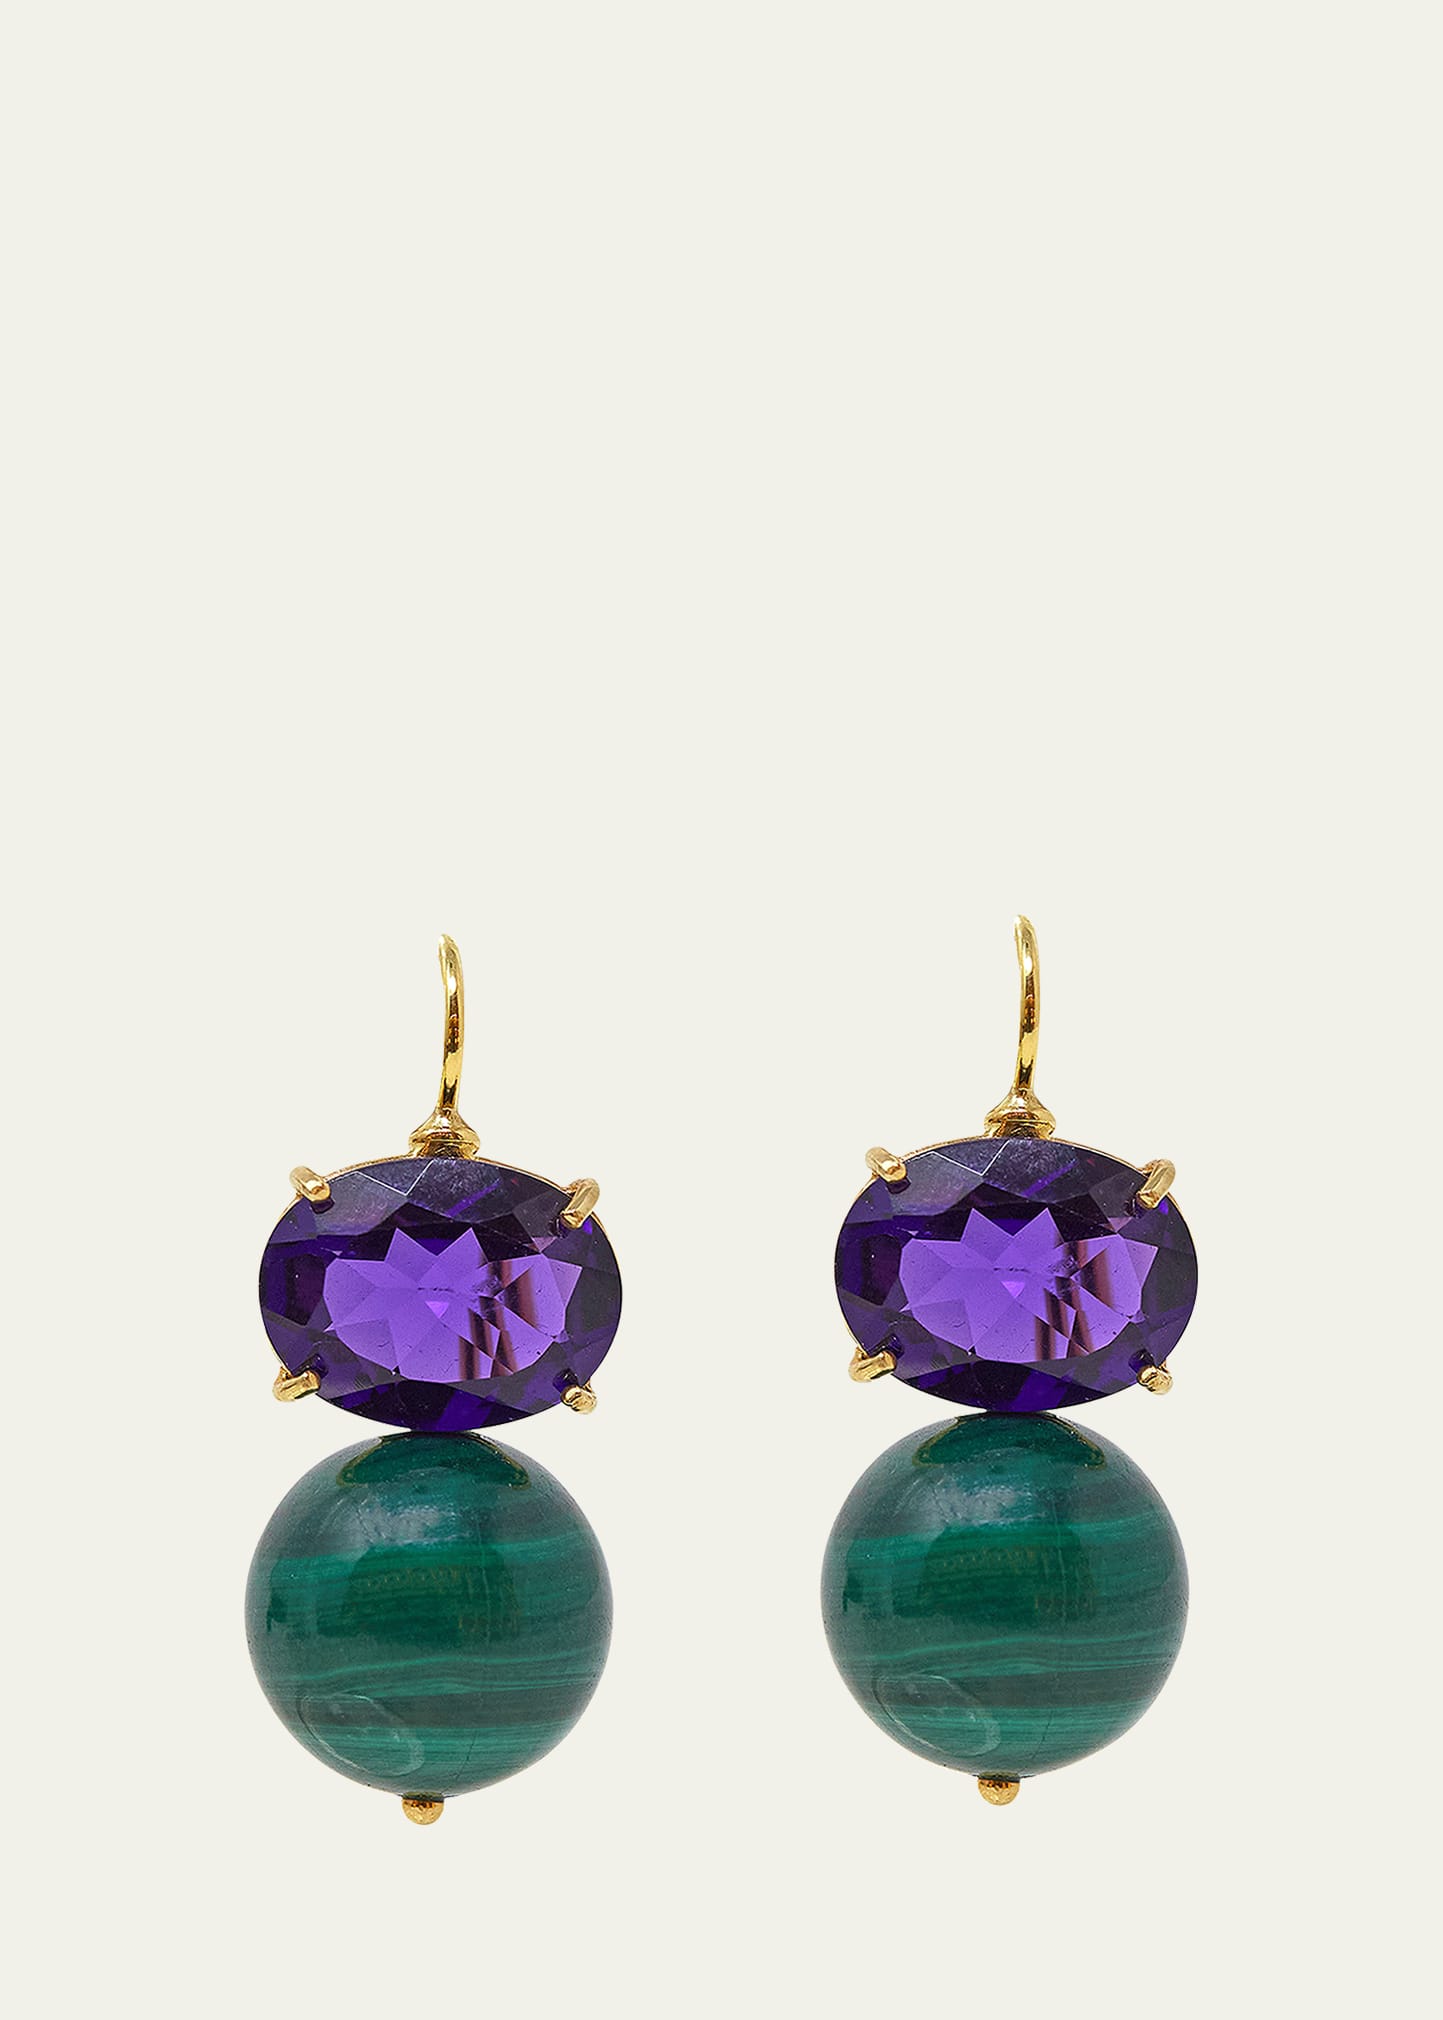 Grazia And Marica Vozza 18k Yellow Gold Hook Earrings With Malachite And Amethyst In Multi